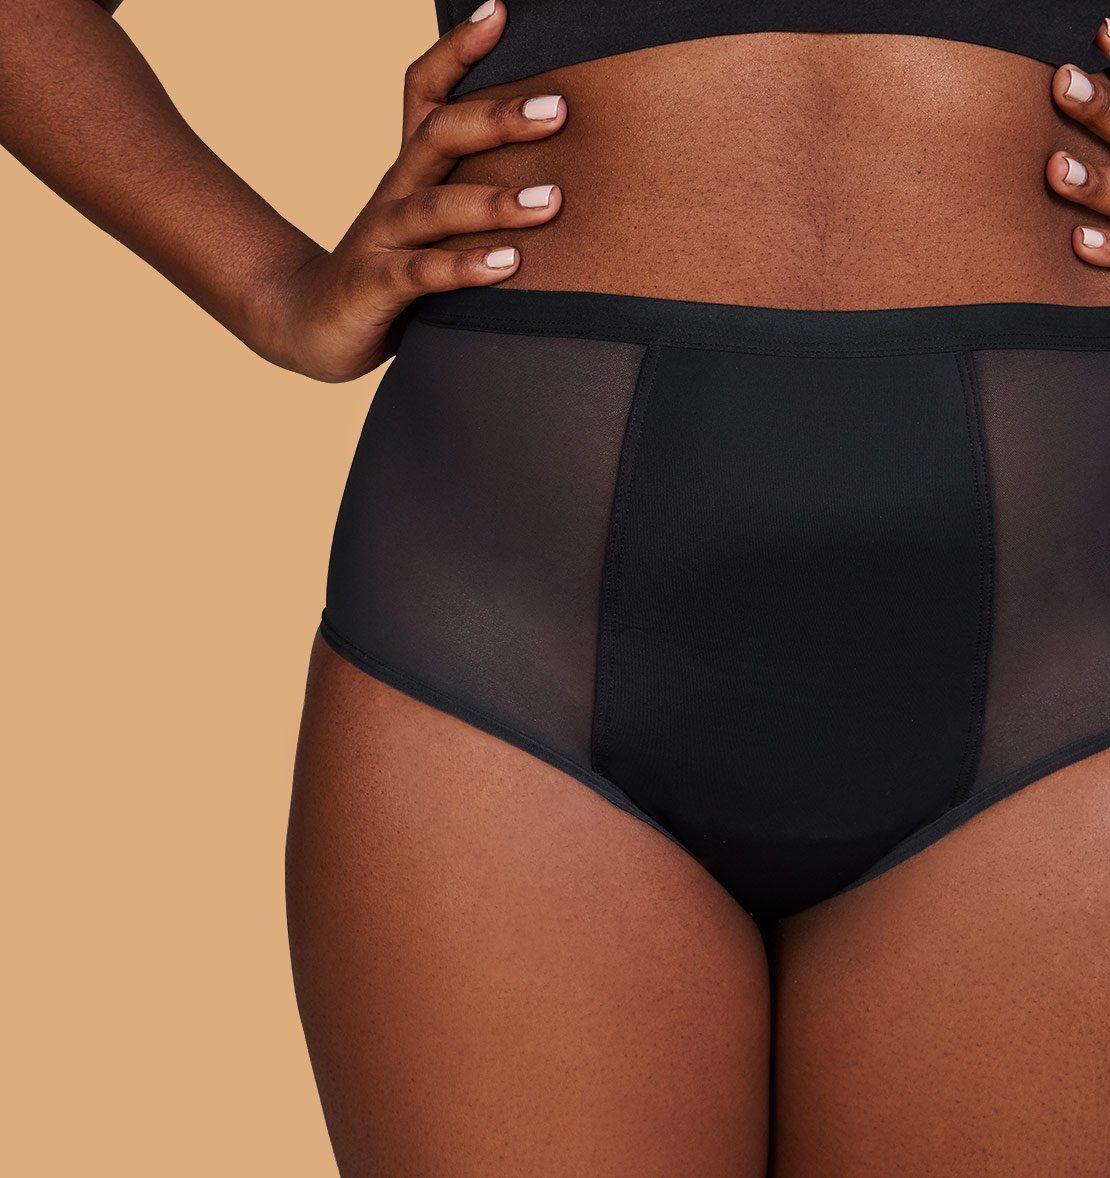 PERIOD UNDERWEAR: My Honest And Very Candid Review - The Organised